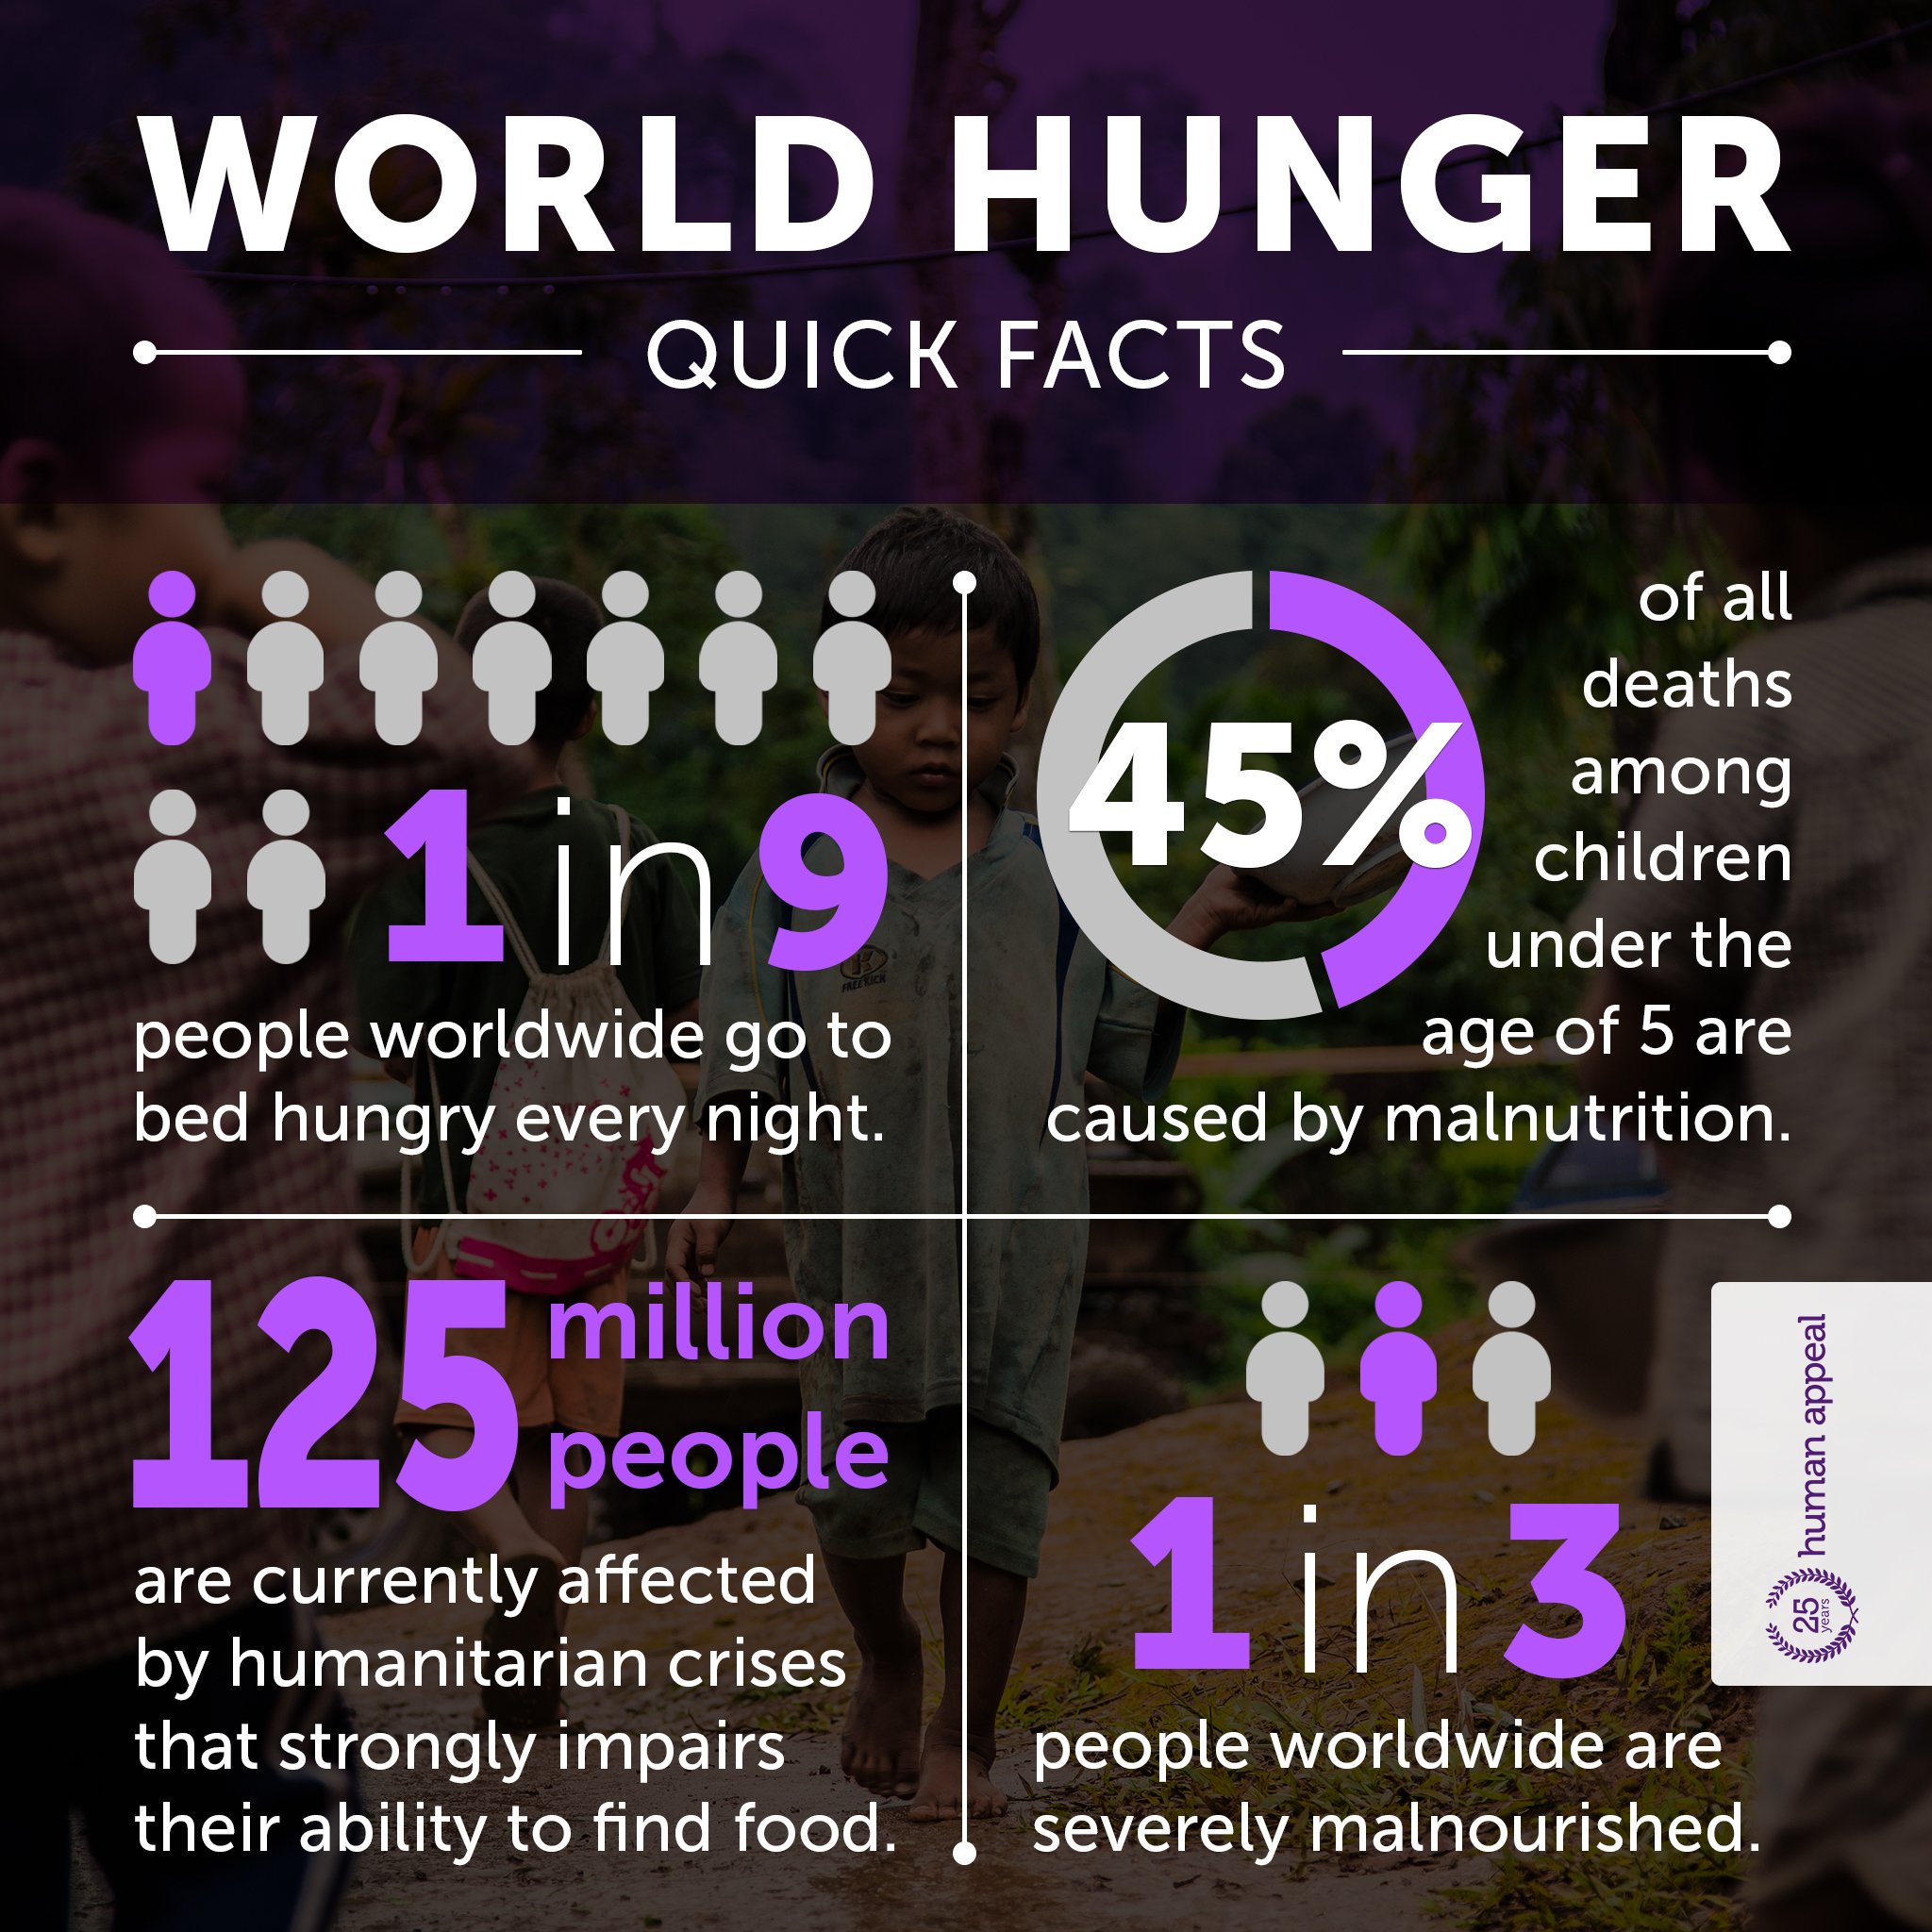 world hunger quick facts